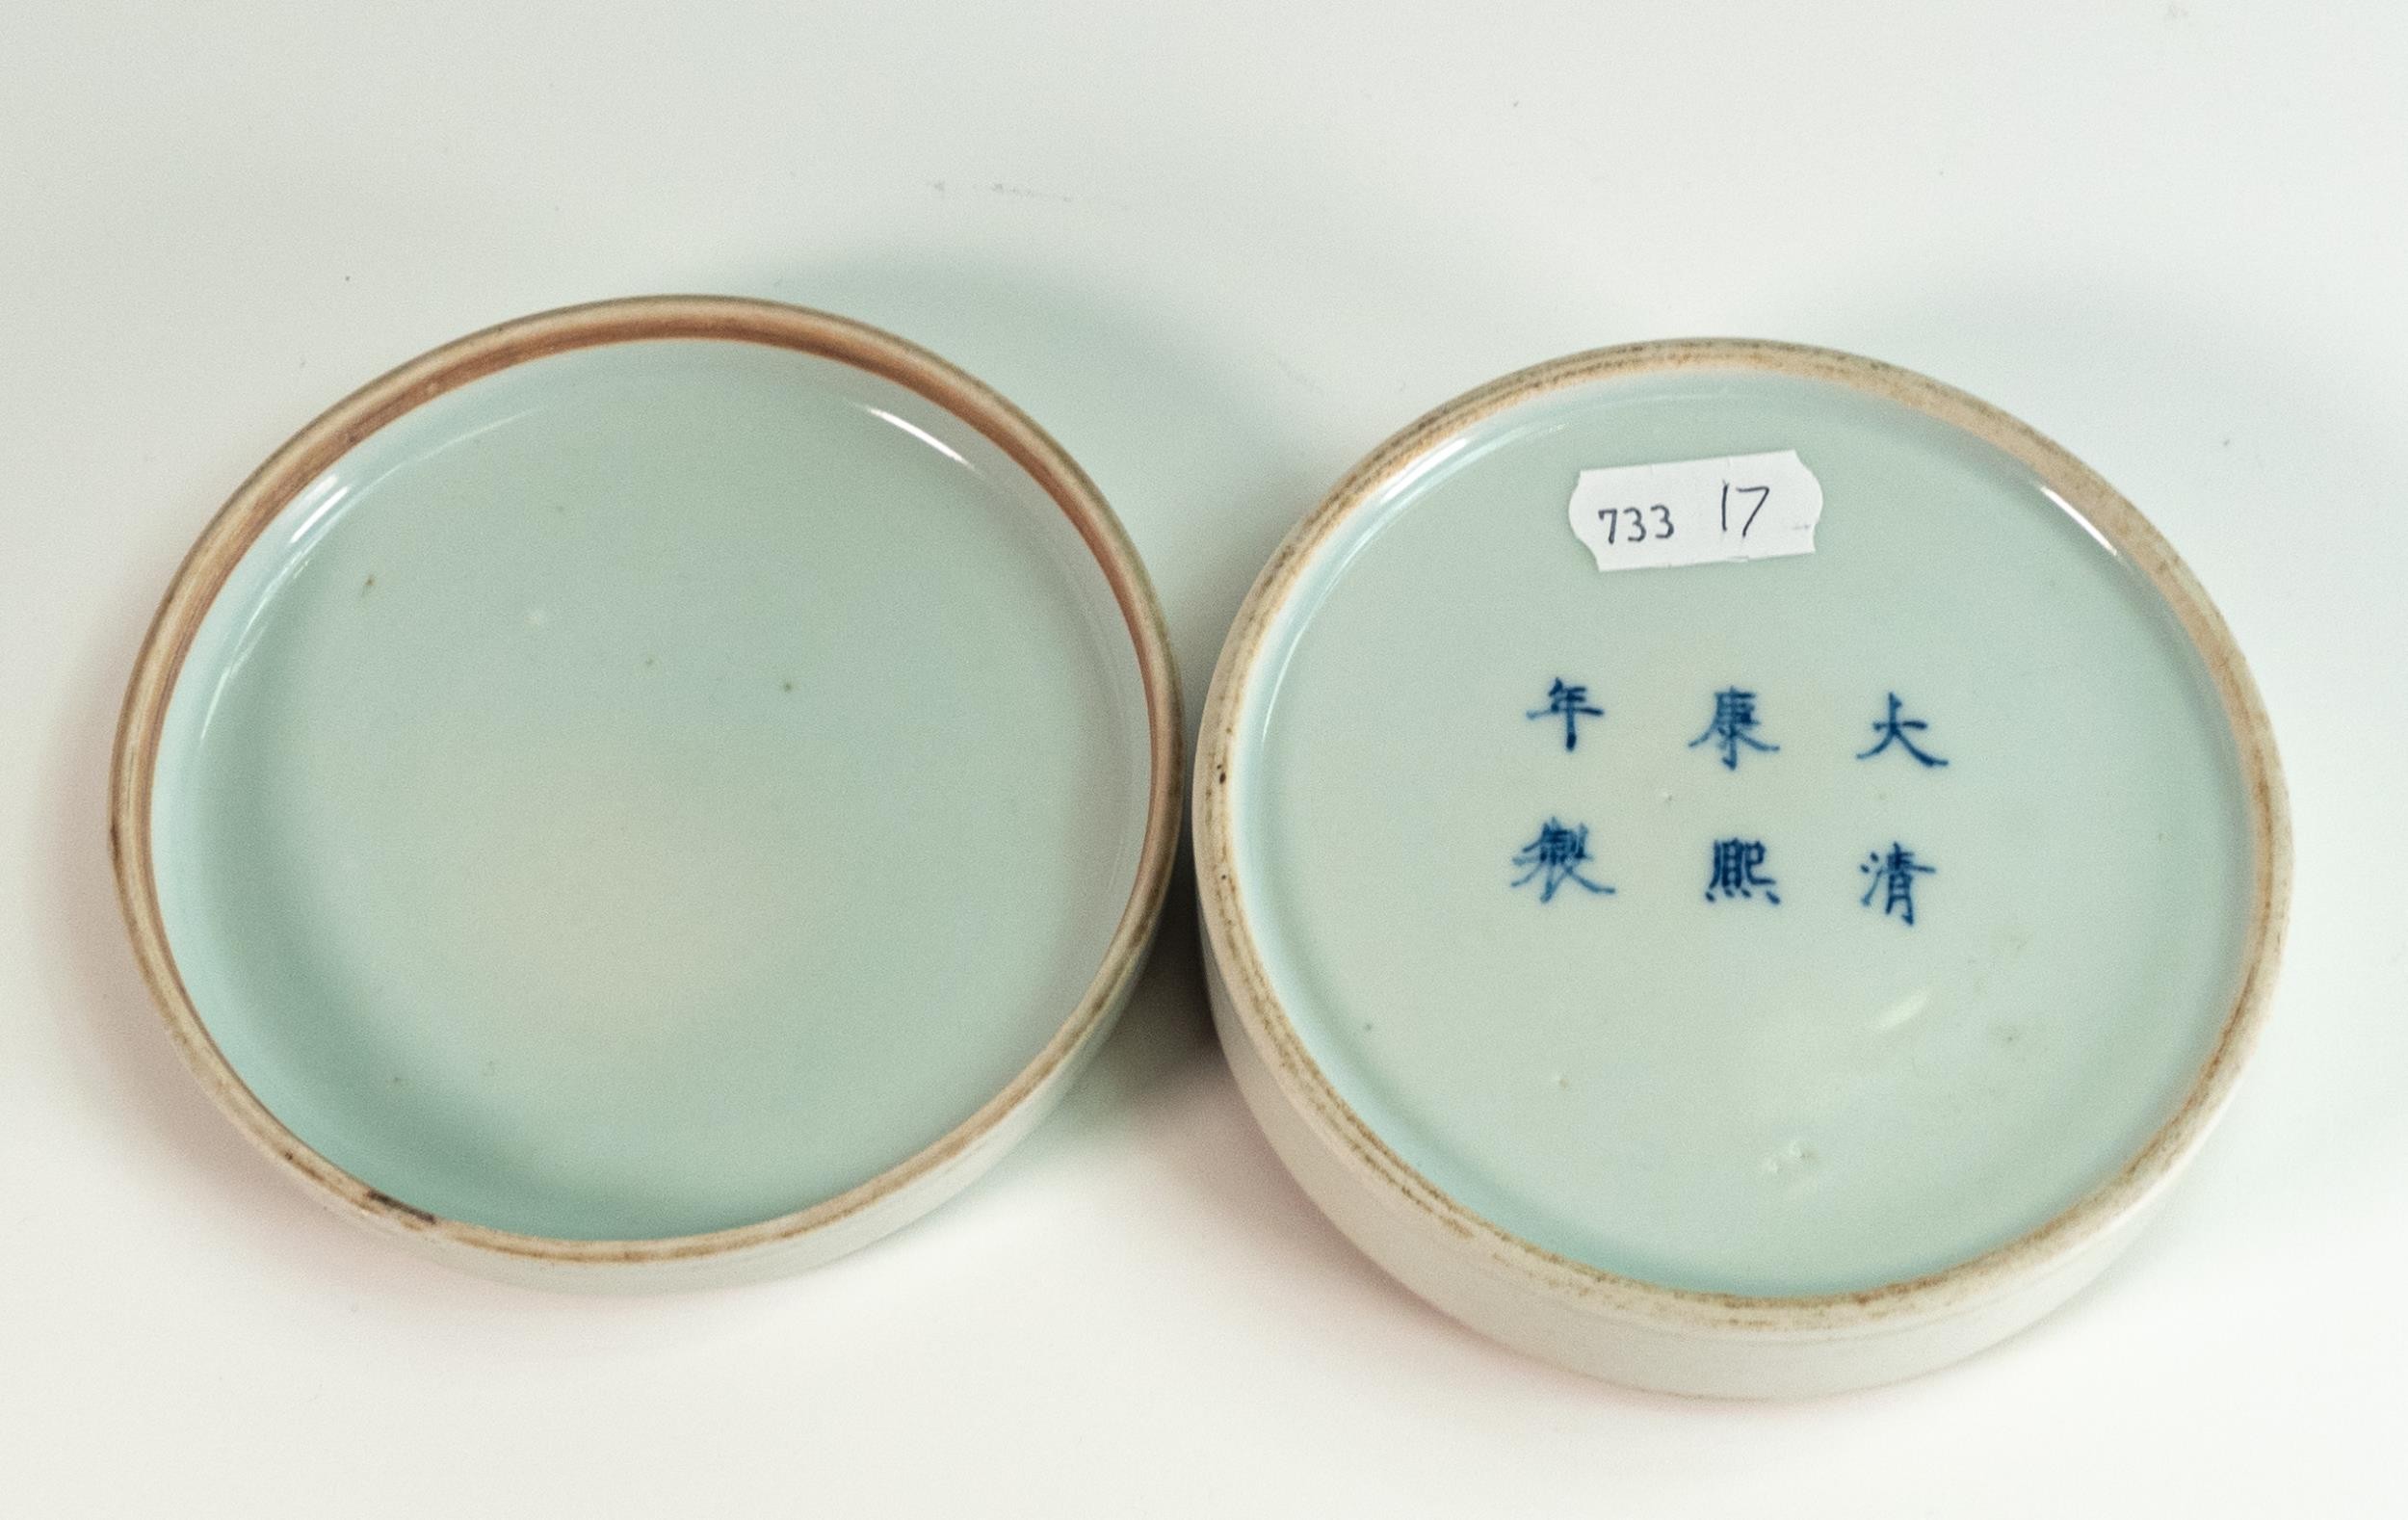 Seal paste box and cover, lid painted with flying bird in a night sky, with moon depicted above. - Image 4 of 4